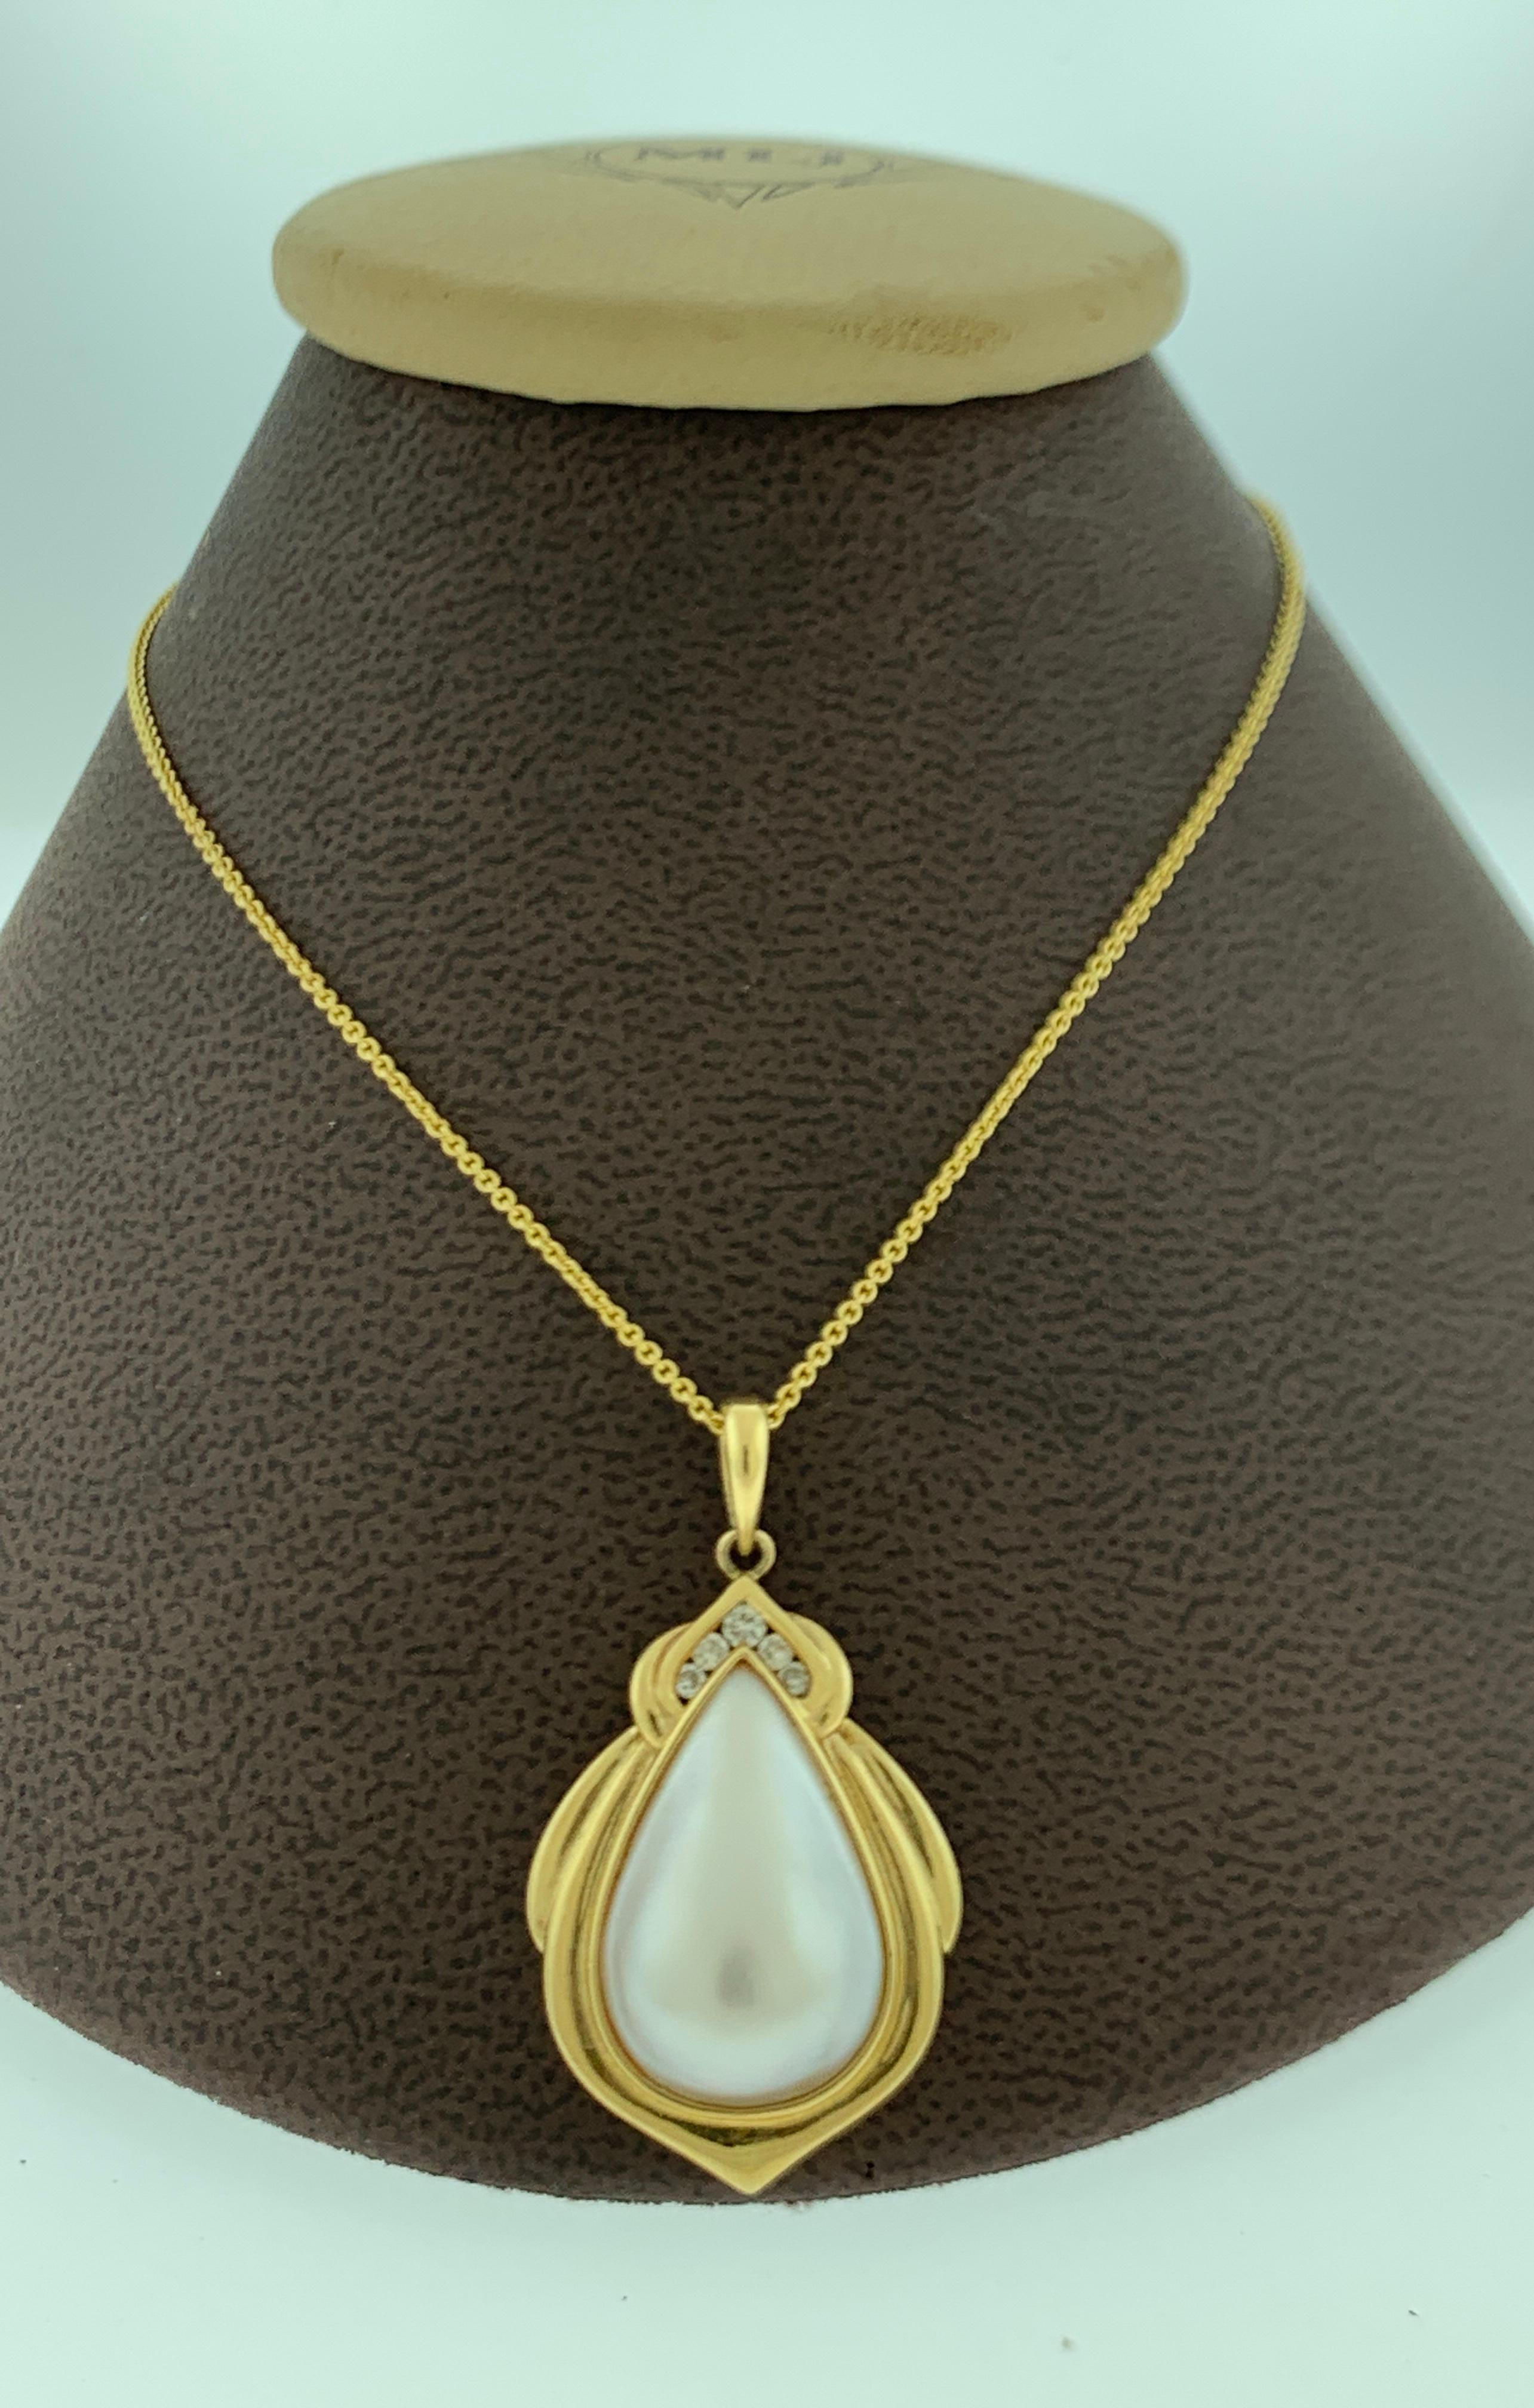 Pear Mabe Pearl and Diamond Pendant / Necklace 14 Karat Yellow Gold with Chain 7